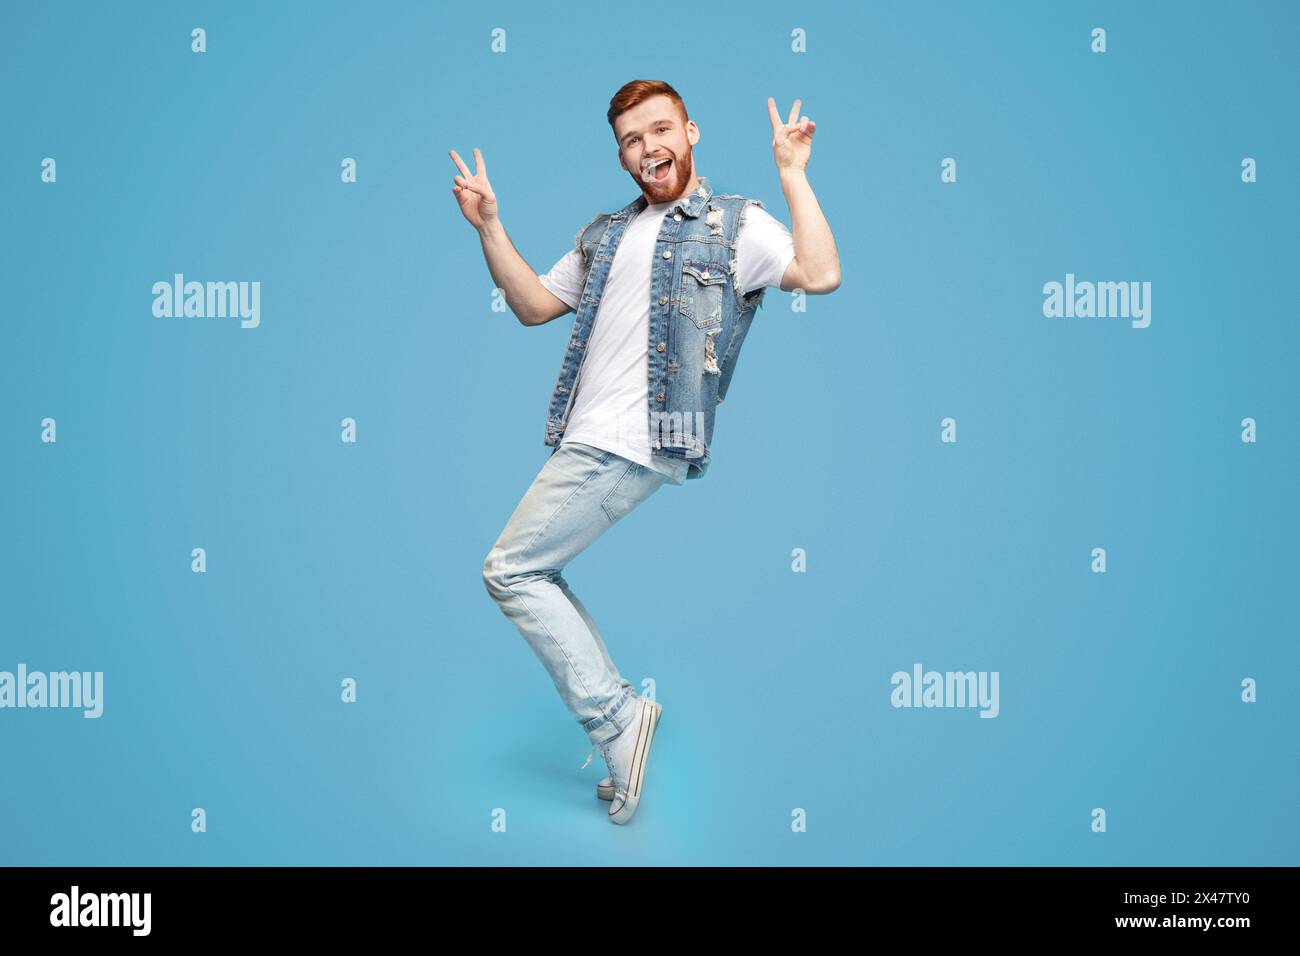 Awesome guy showing peace gesture and standing on tiptoes Stock Photo